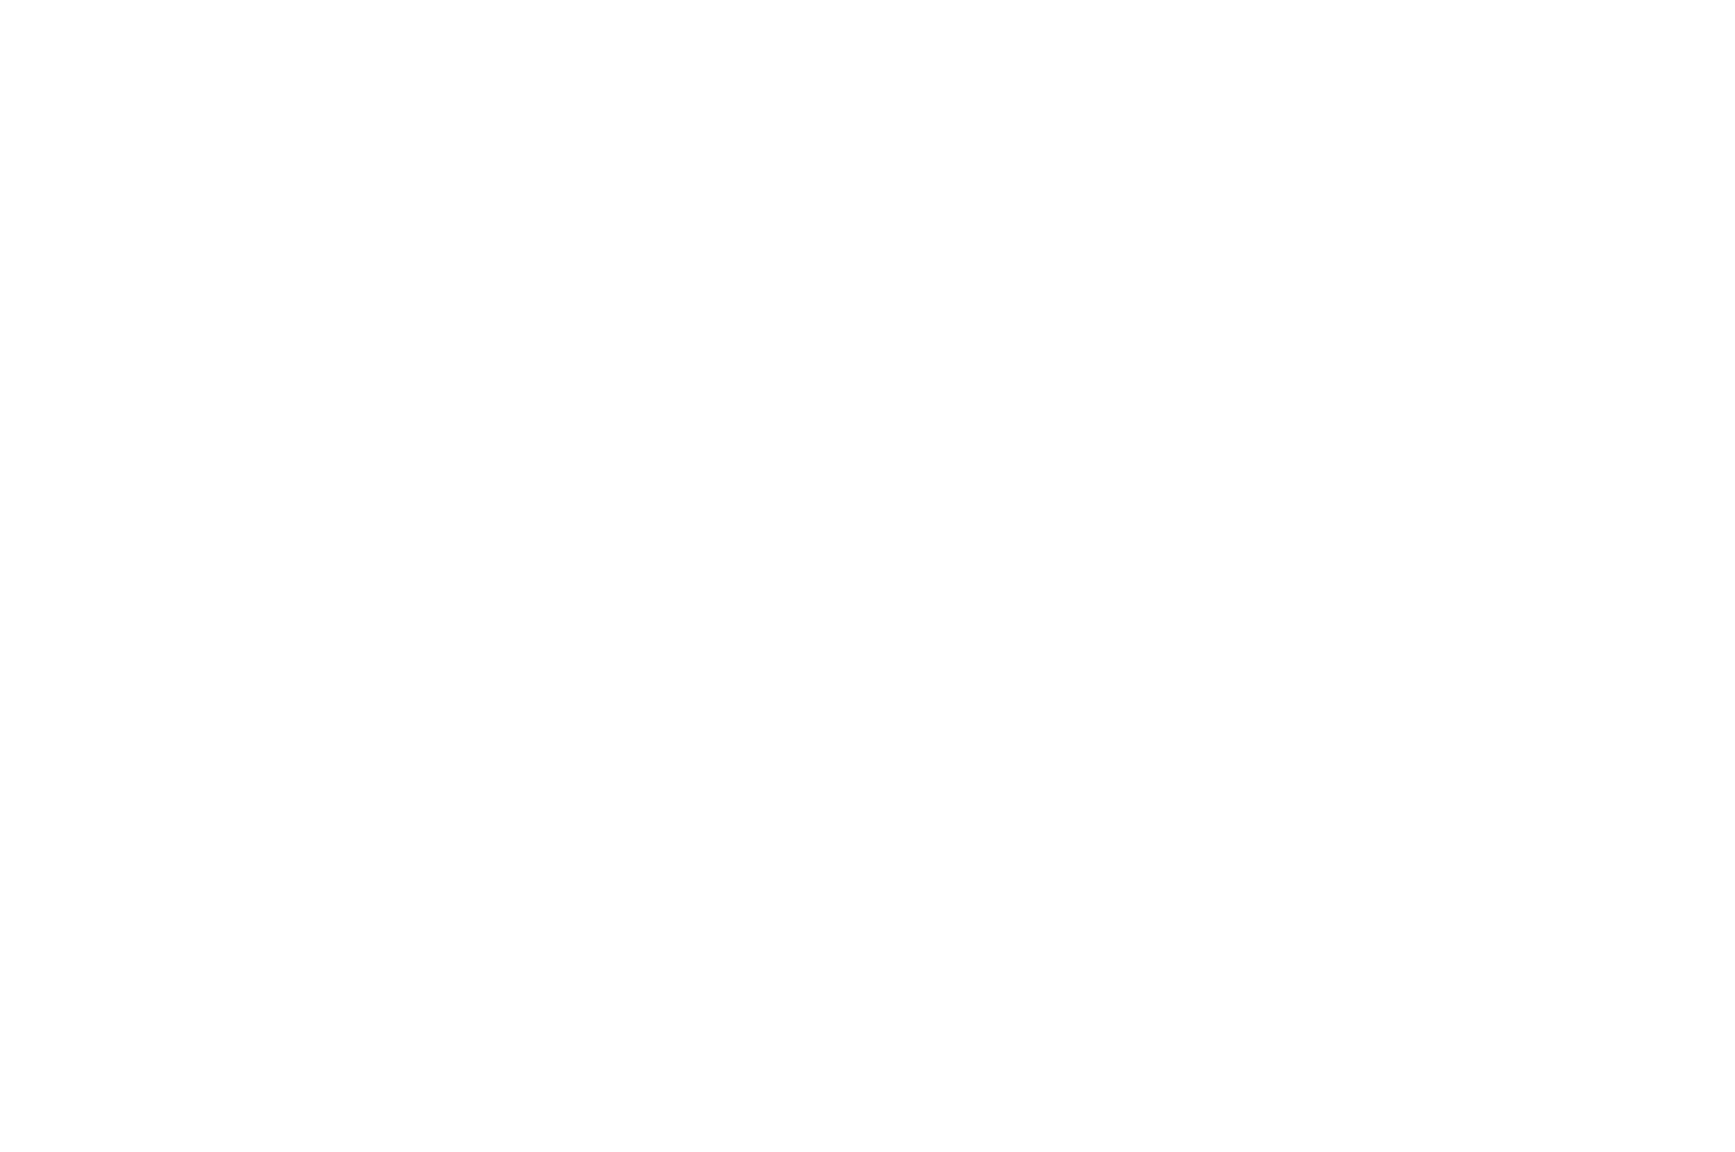 MOUNTAIN FILM FESTIVAL - Official Selection - 2019.png